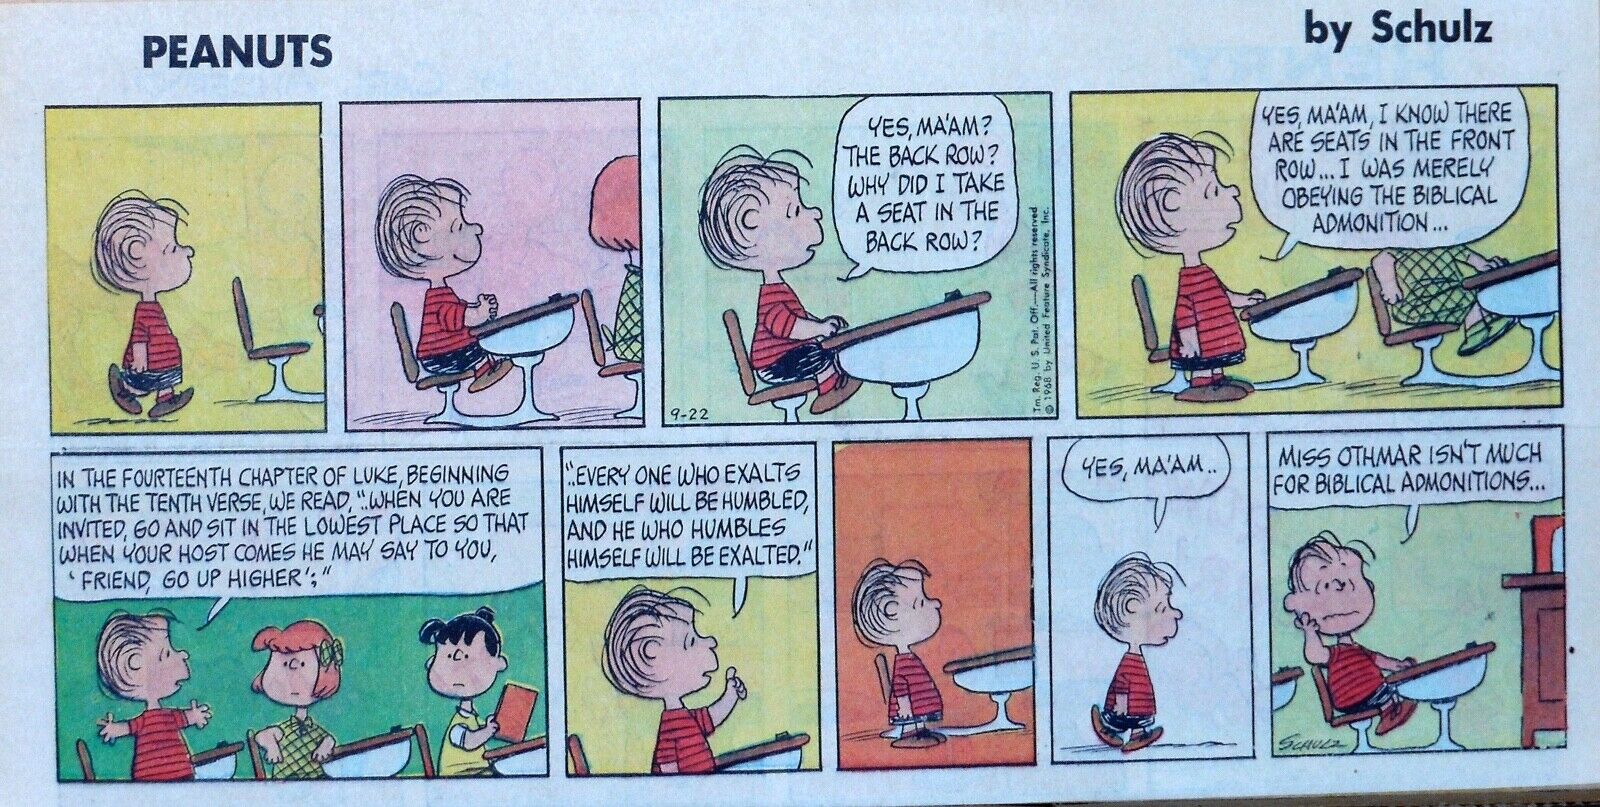 Peanuts by Charles Schulz - Linus - color Sunday comic page - September 22, 1968